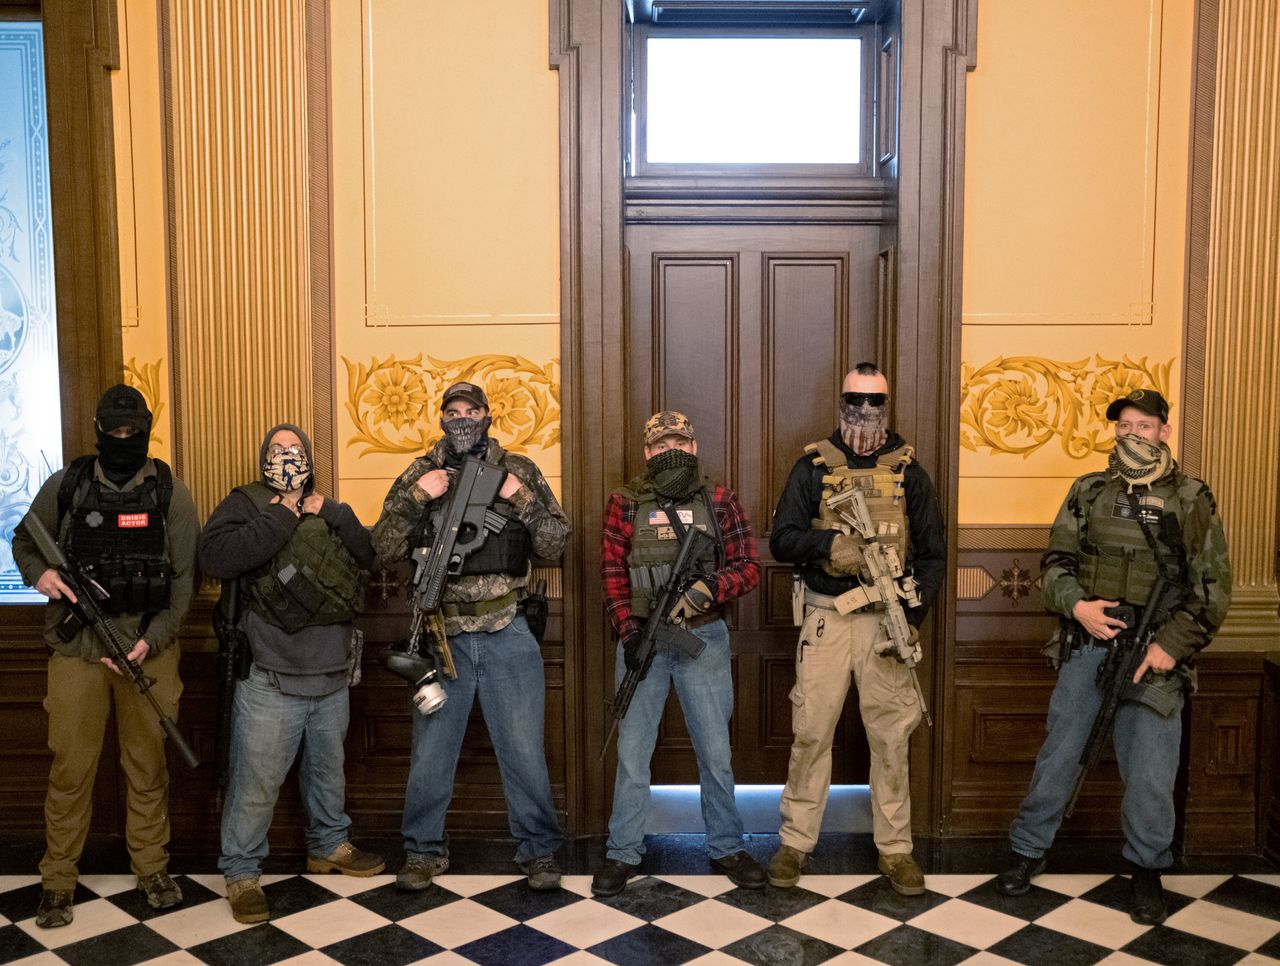 A Michigan militia group stands in front of the governor's office April 30 after protesters occupied the state Capitol in Lansing during a vote to approve the extension of Gov. Gretchen Whitmer's stay-at-home order to deal with the rise of coronavirus infections.